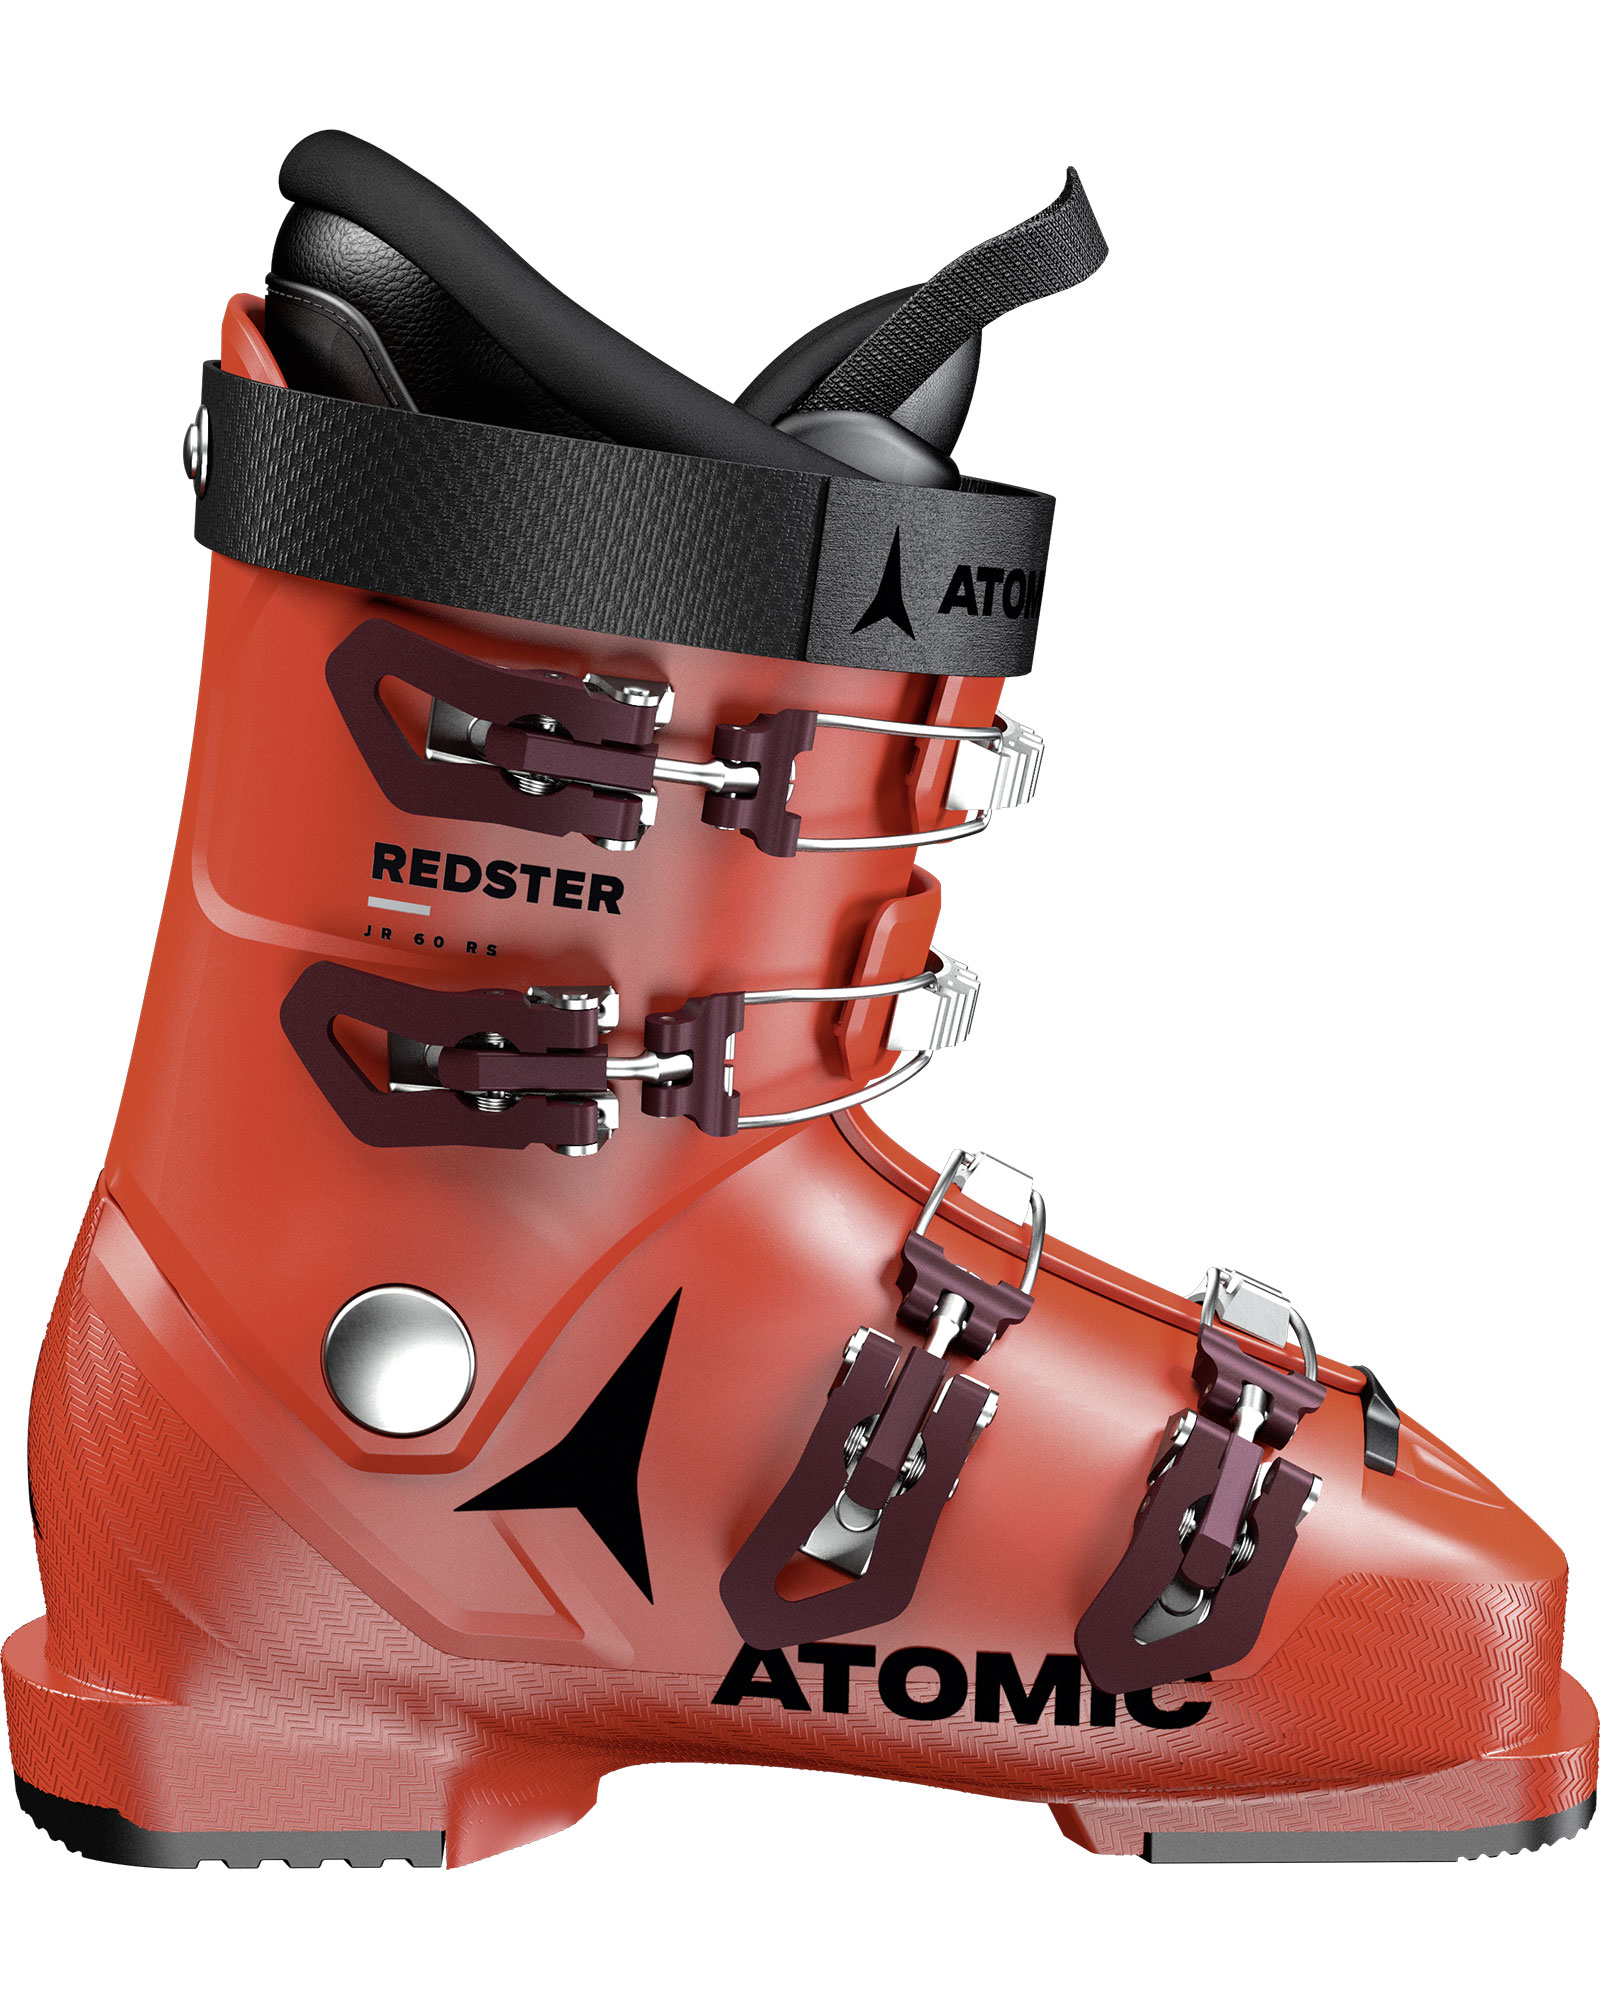 Atomic Redster JR 60 RS (Size 24.0 and below) Youth Ski Boots 2024 MP 24.0